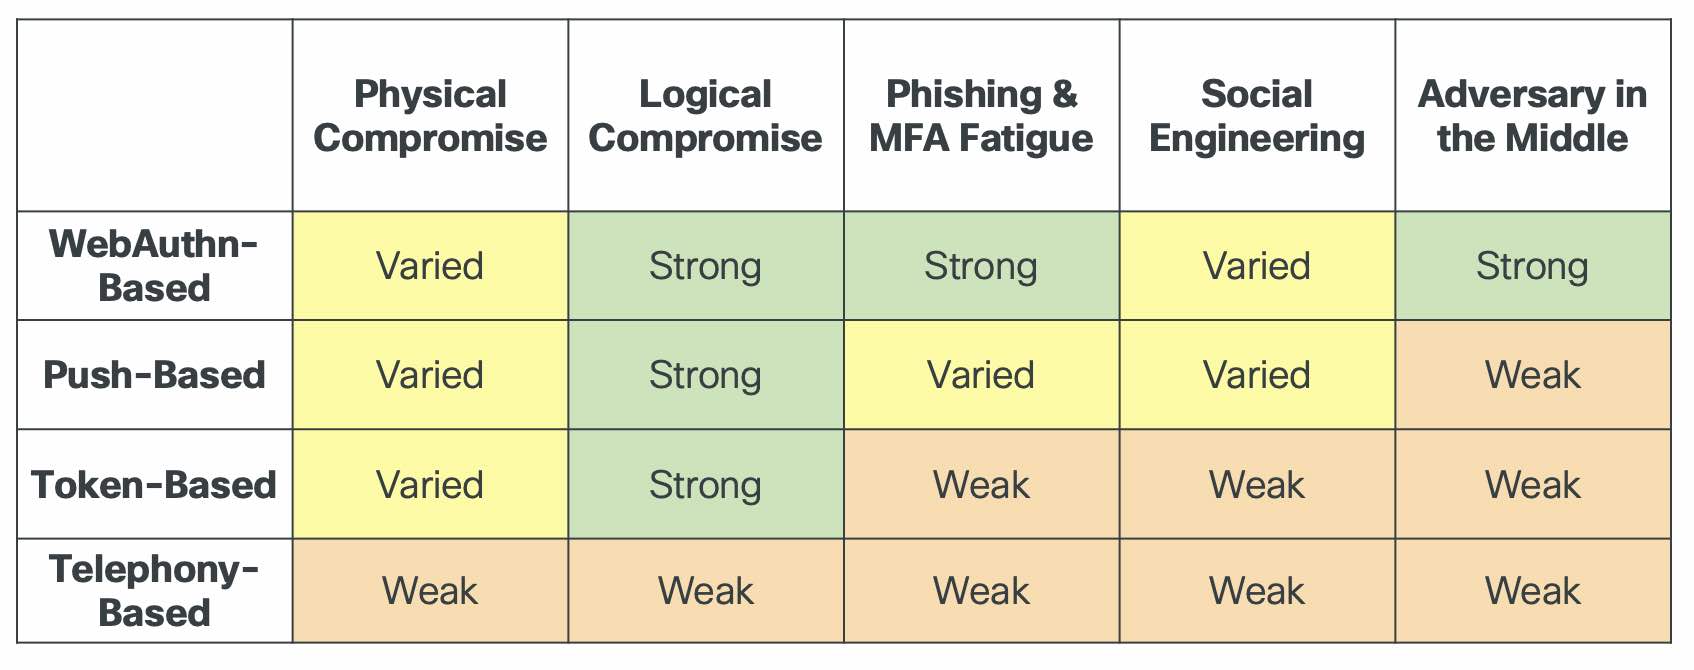 Table showing how successfully different types of authentication stand up to different types of compromise